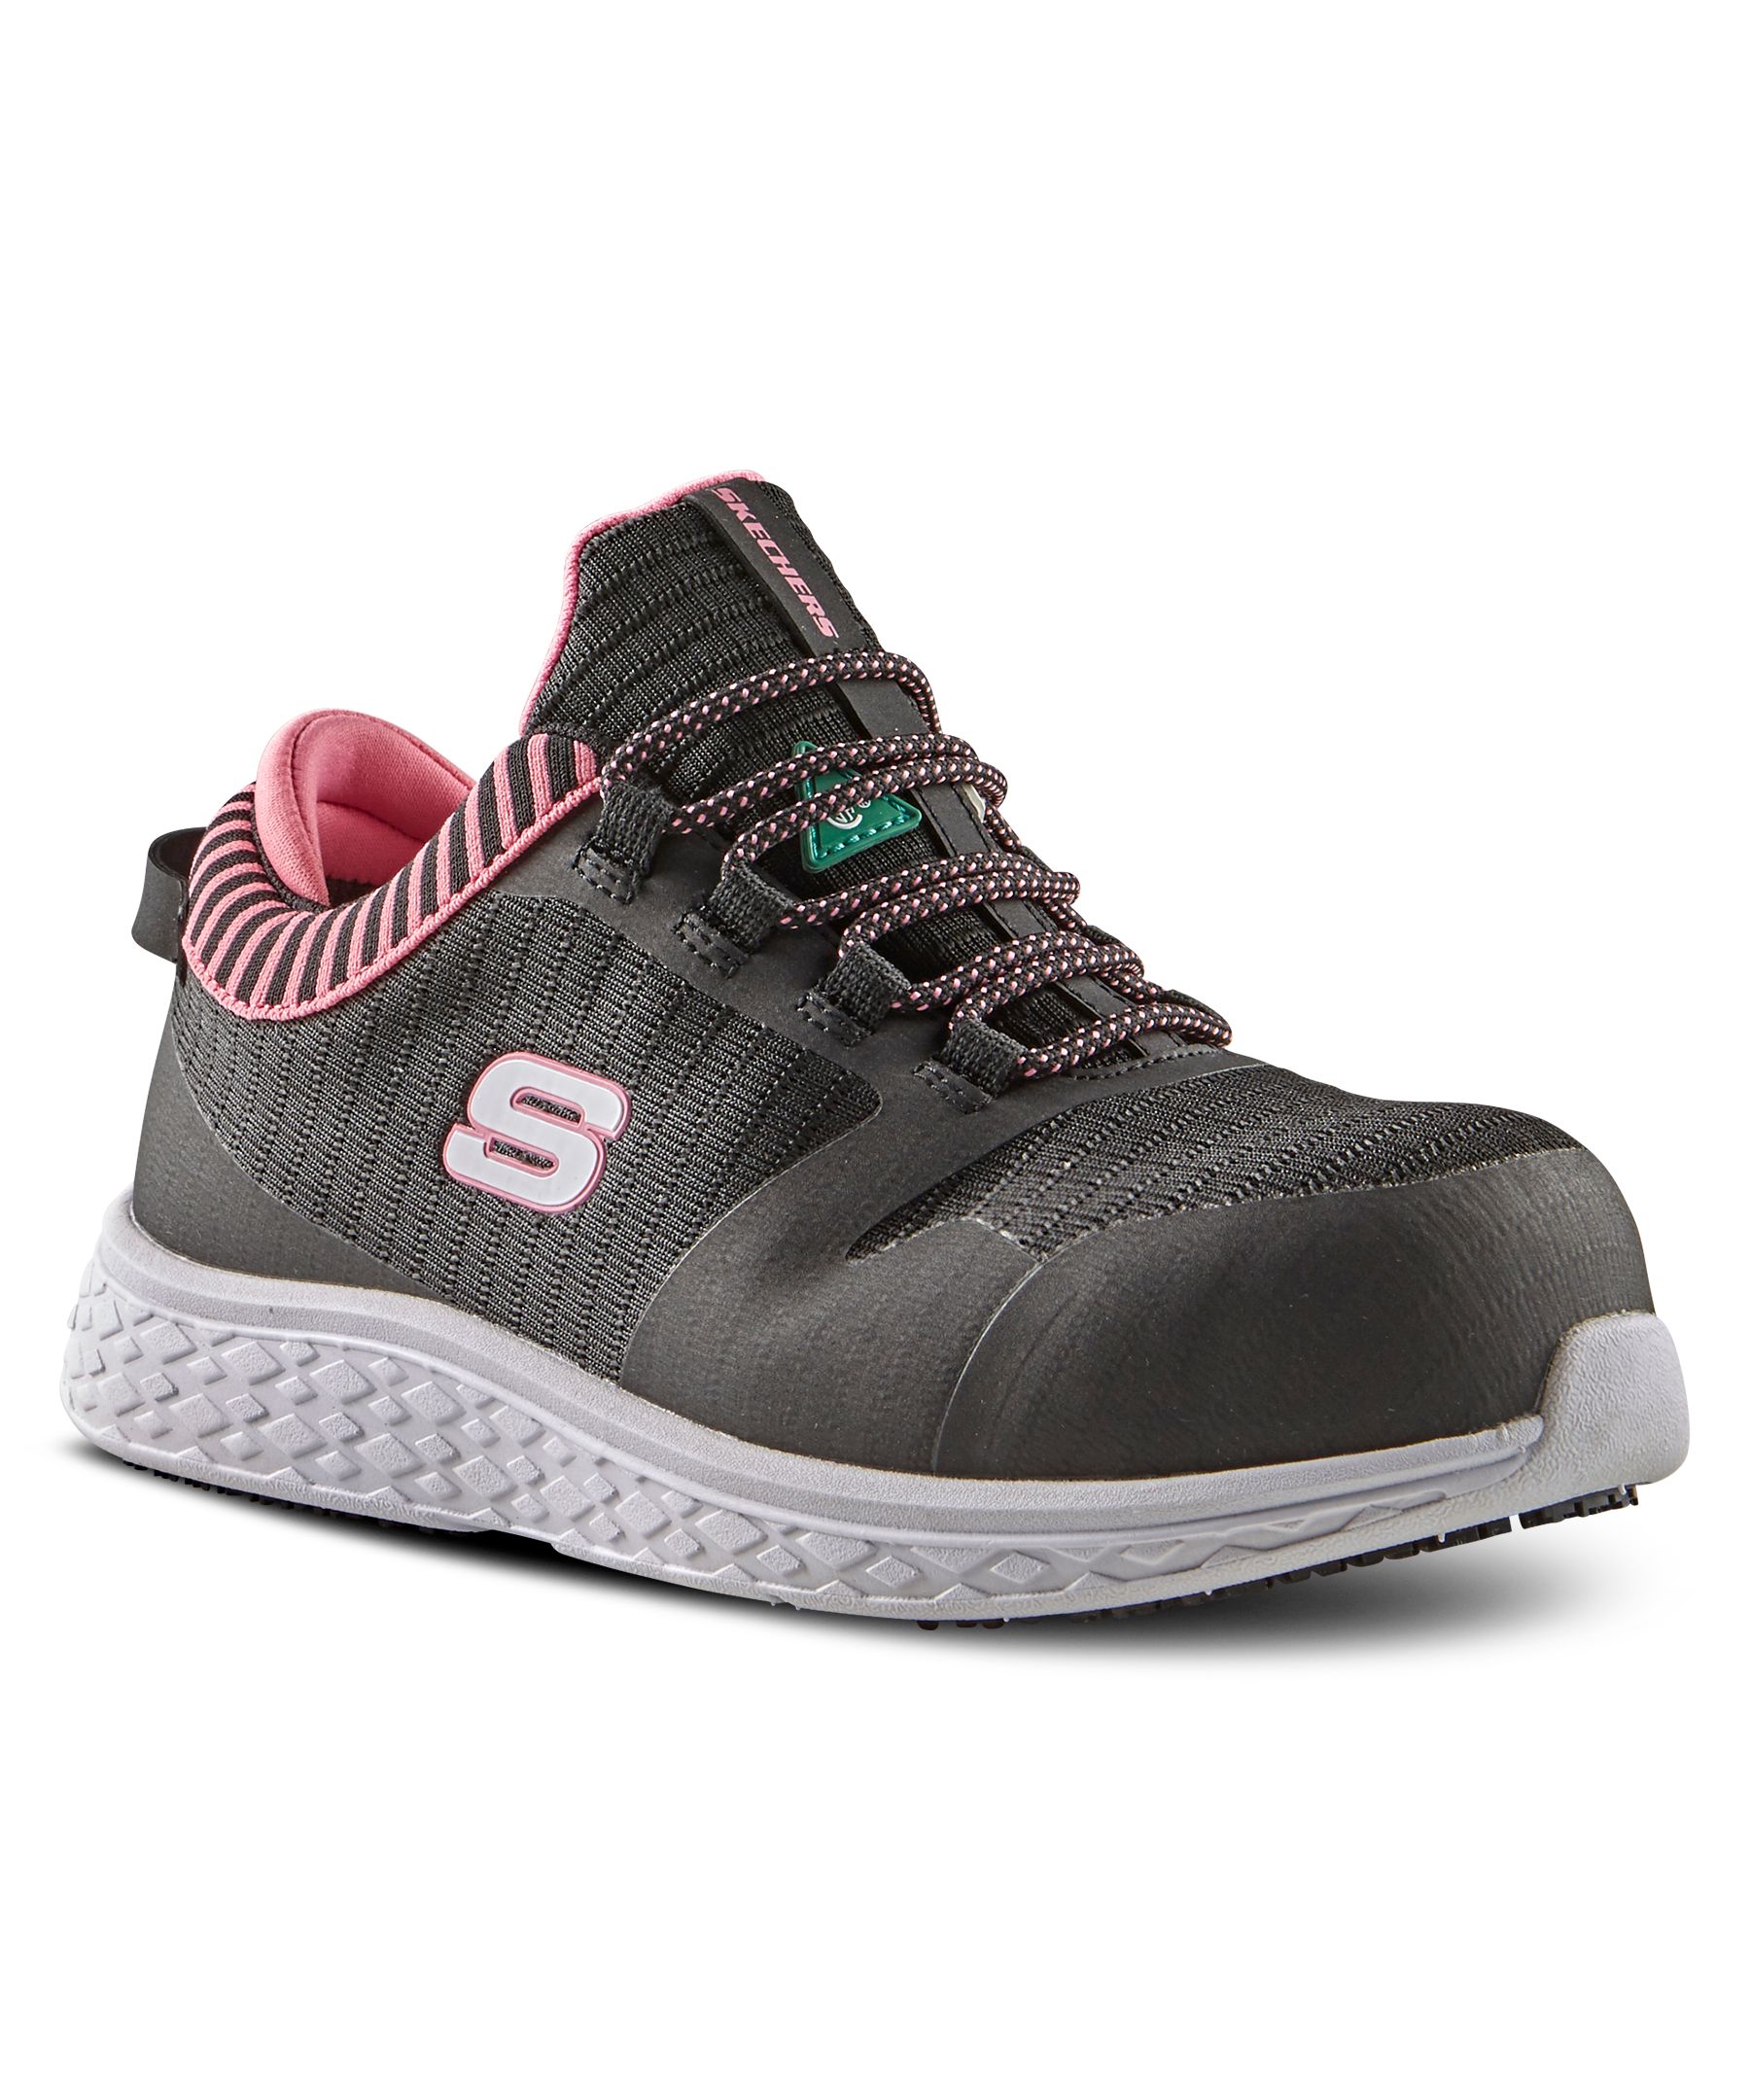 Skechers Work Women's Aluminum Toe Plate Resistant Athletic Safety Shoes - Black/Pink | Marks